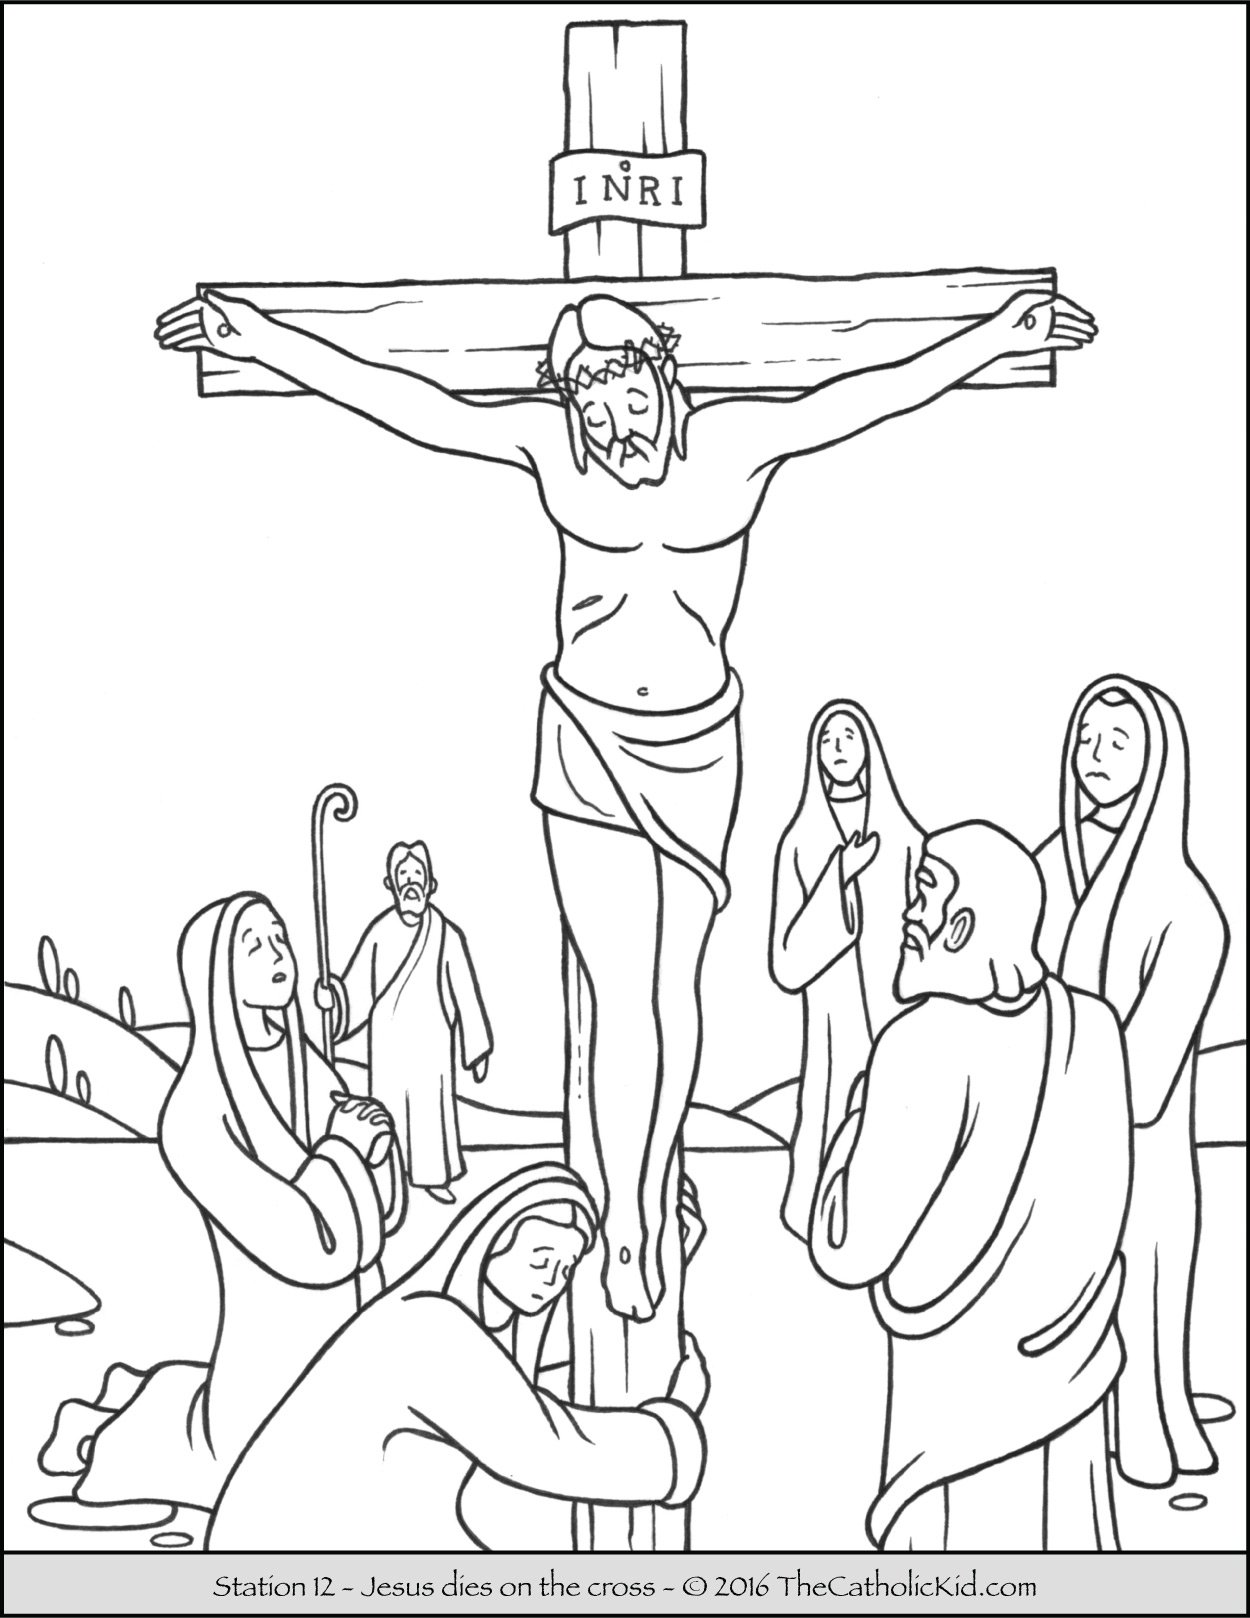 Stations of the cross coloring pages